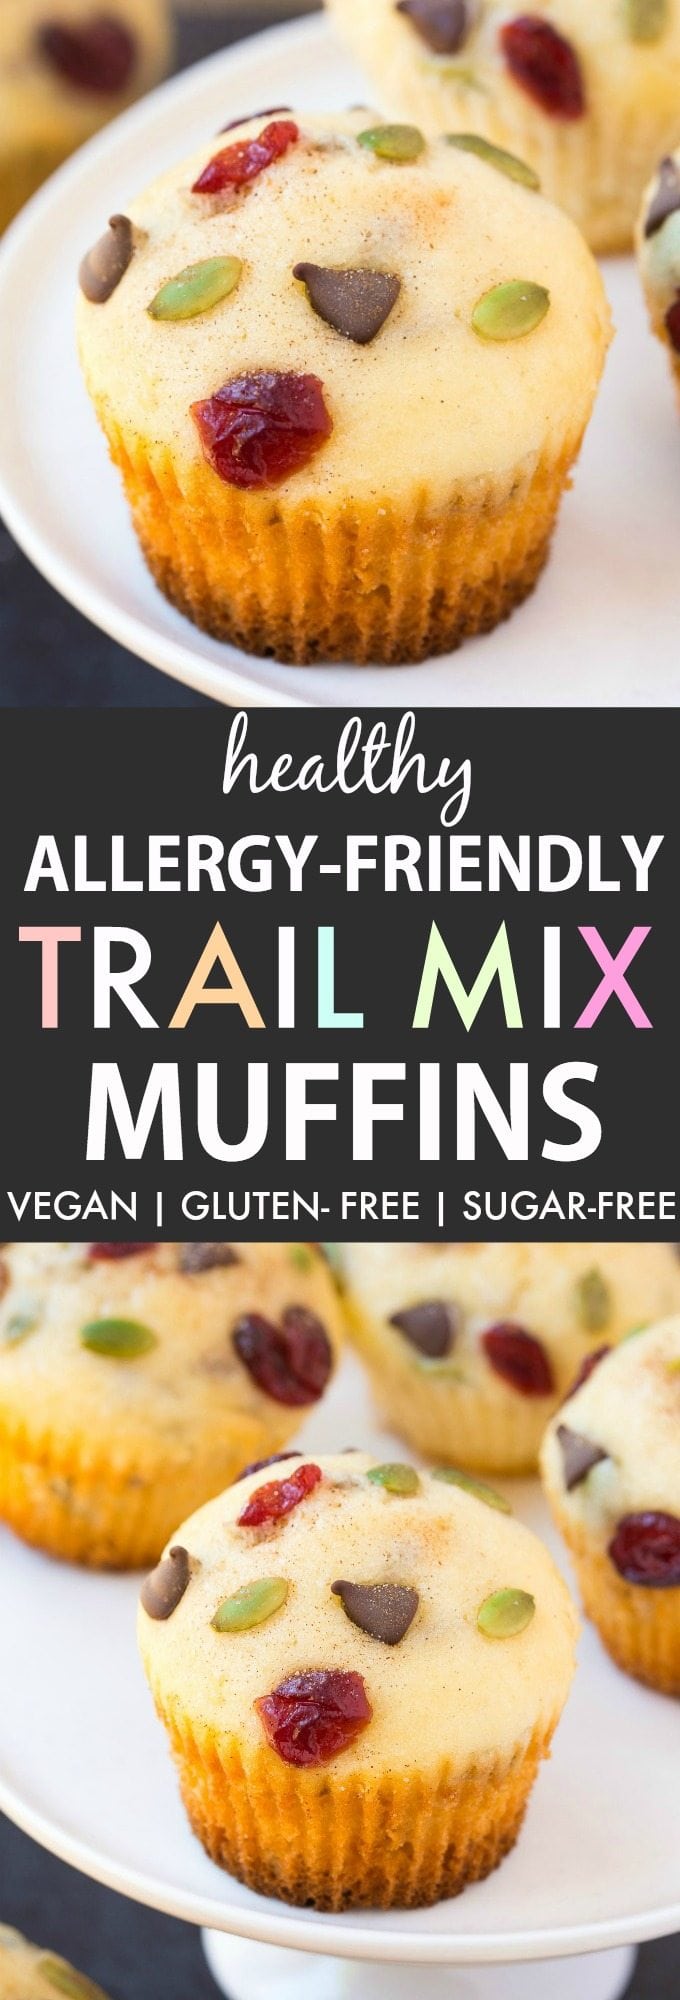 Healthy Trail Mix Muffins (V, GF, DF)- Allergy-Friendly and free from the top 8 allergens, these one bowl bakery style muffins are made with no butter or oil, but are tender and fluffy! {vegan, gluten free, sugar free recipe}- thebigmansworld.com